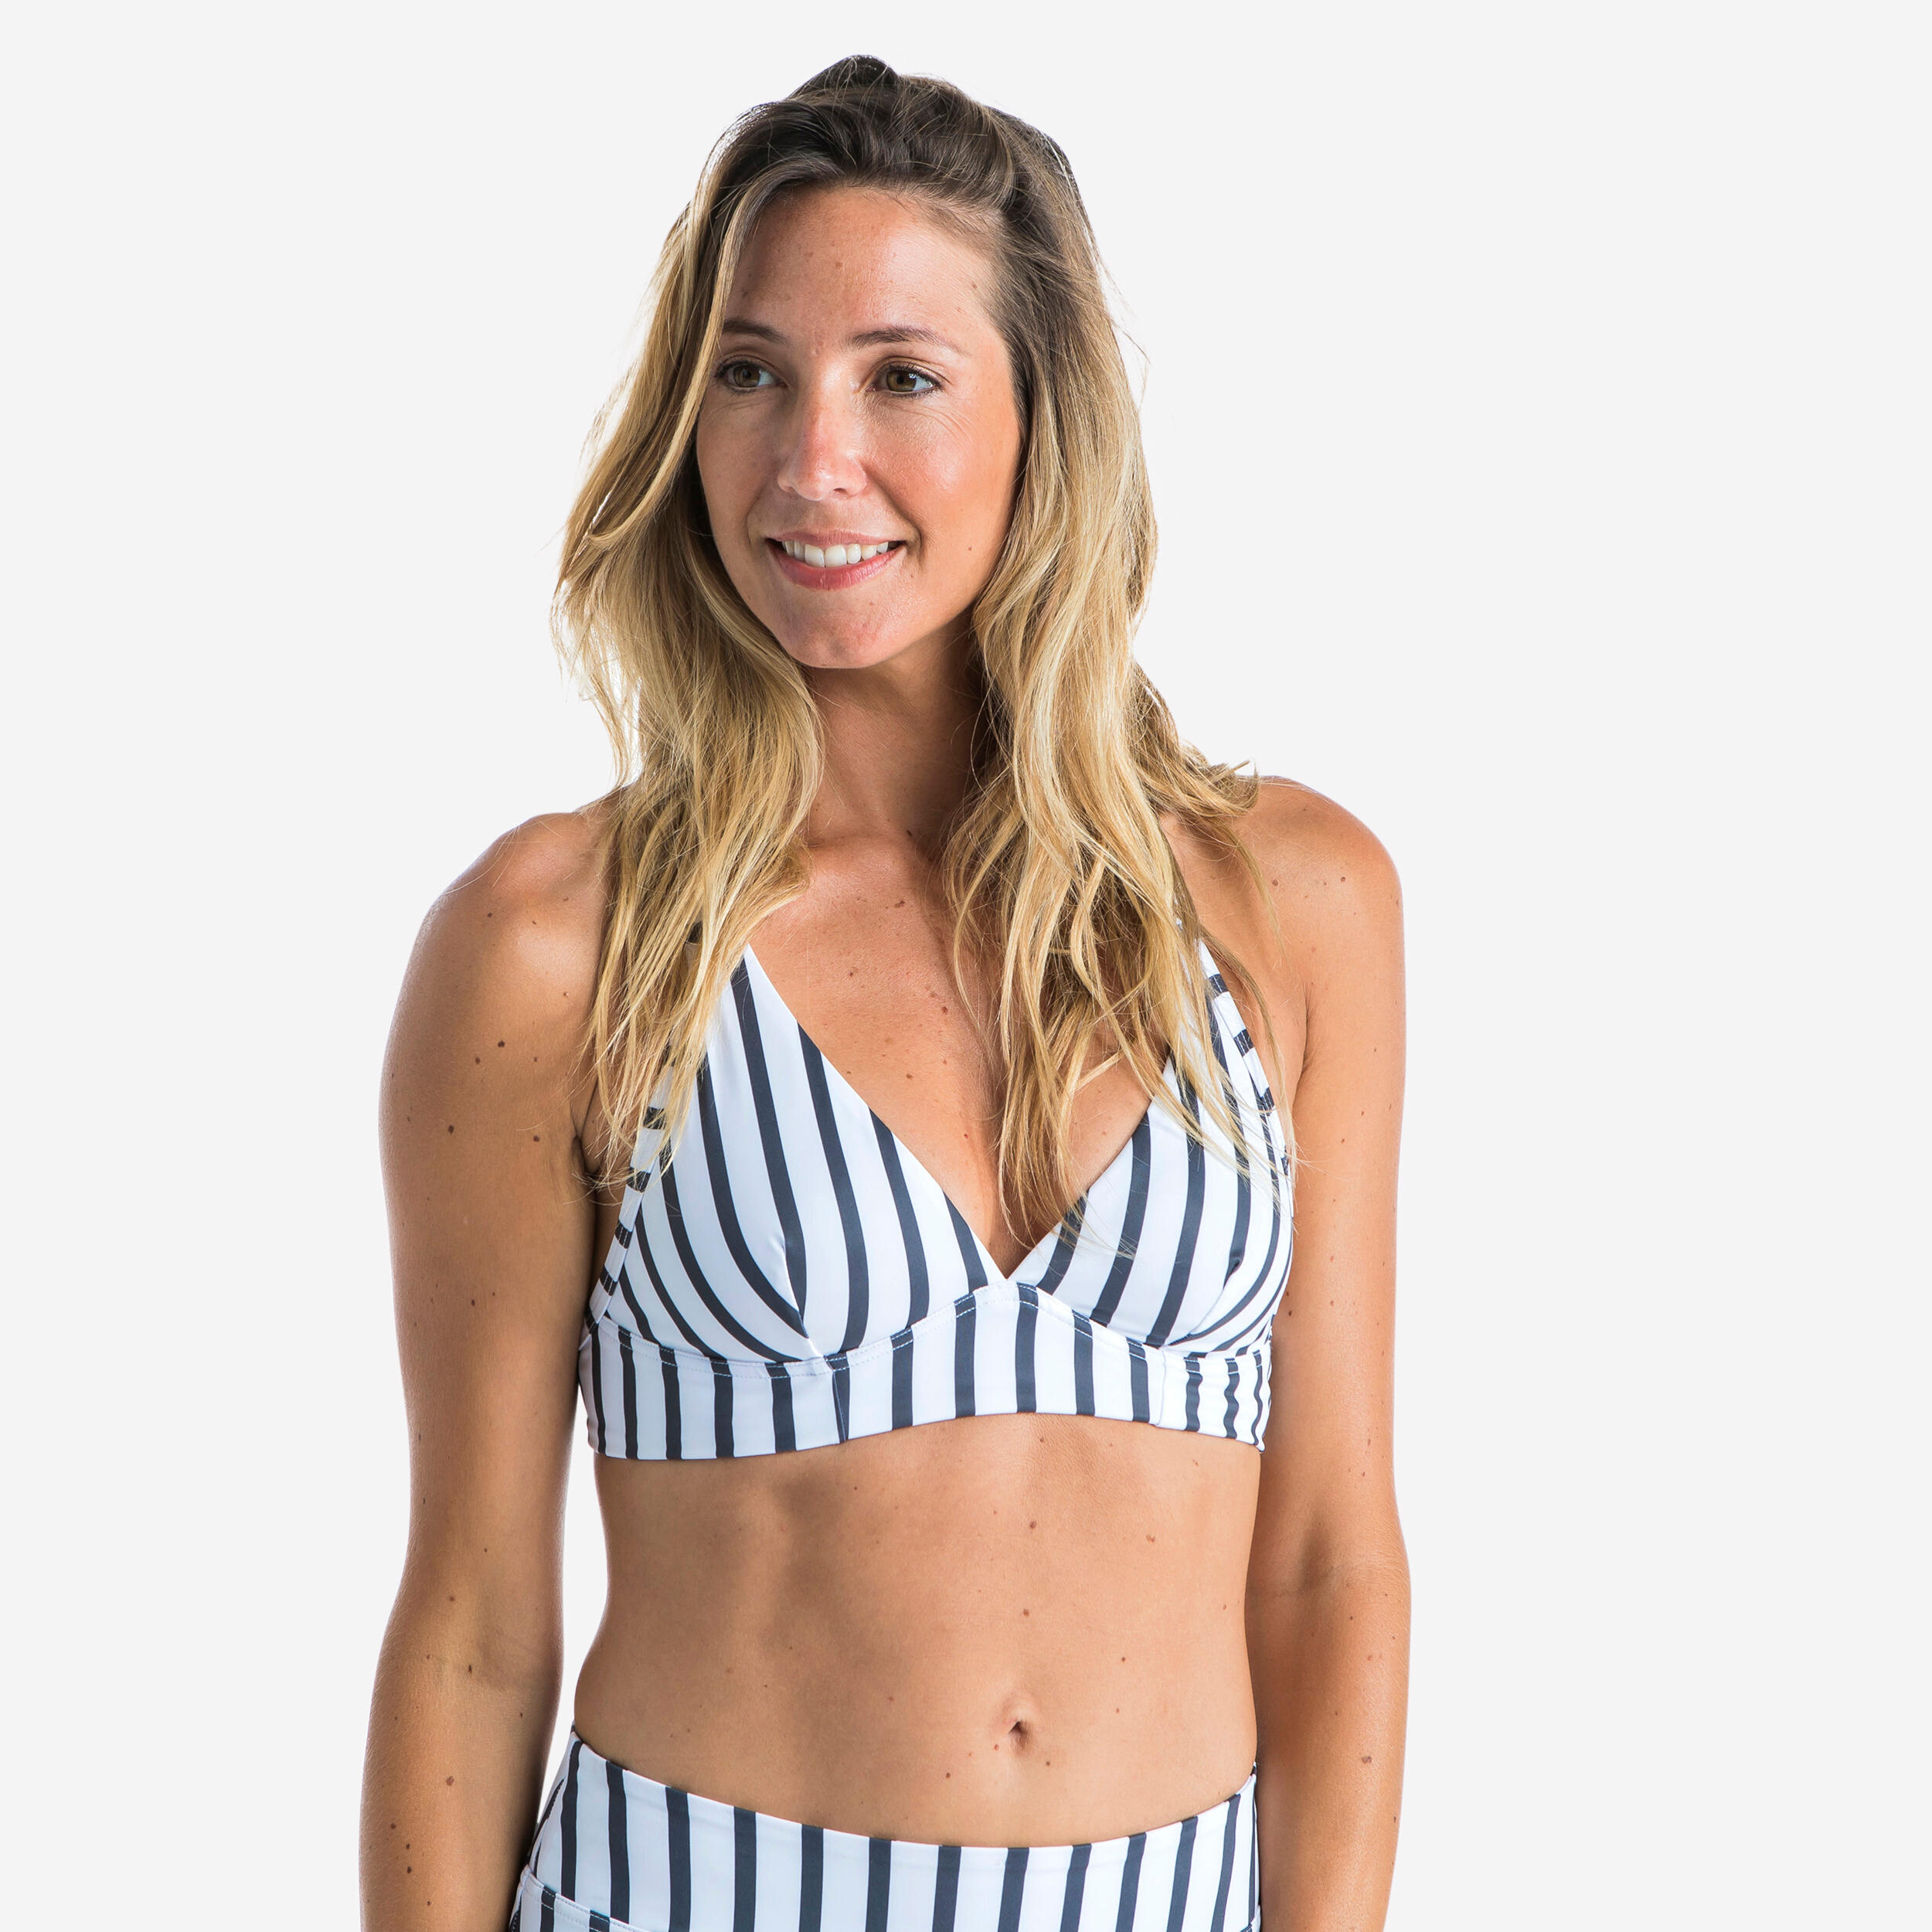 Women's Surfing Swimsuit Crop Top with Adjustable Back BEA MARIN - WHITE GREY 1/11